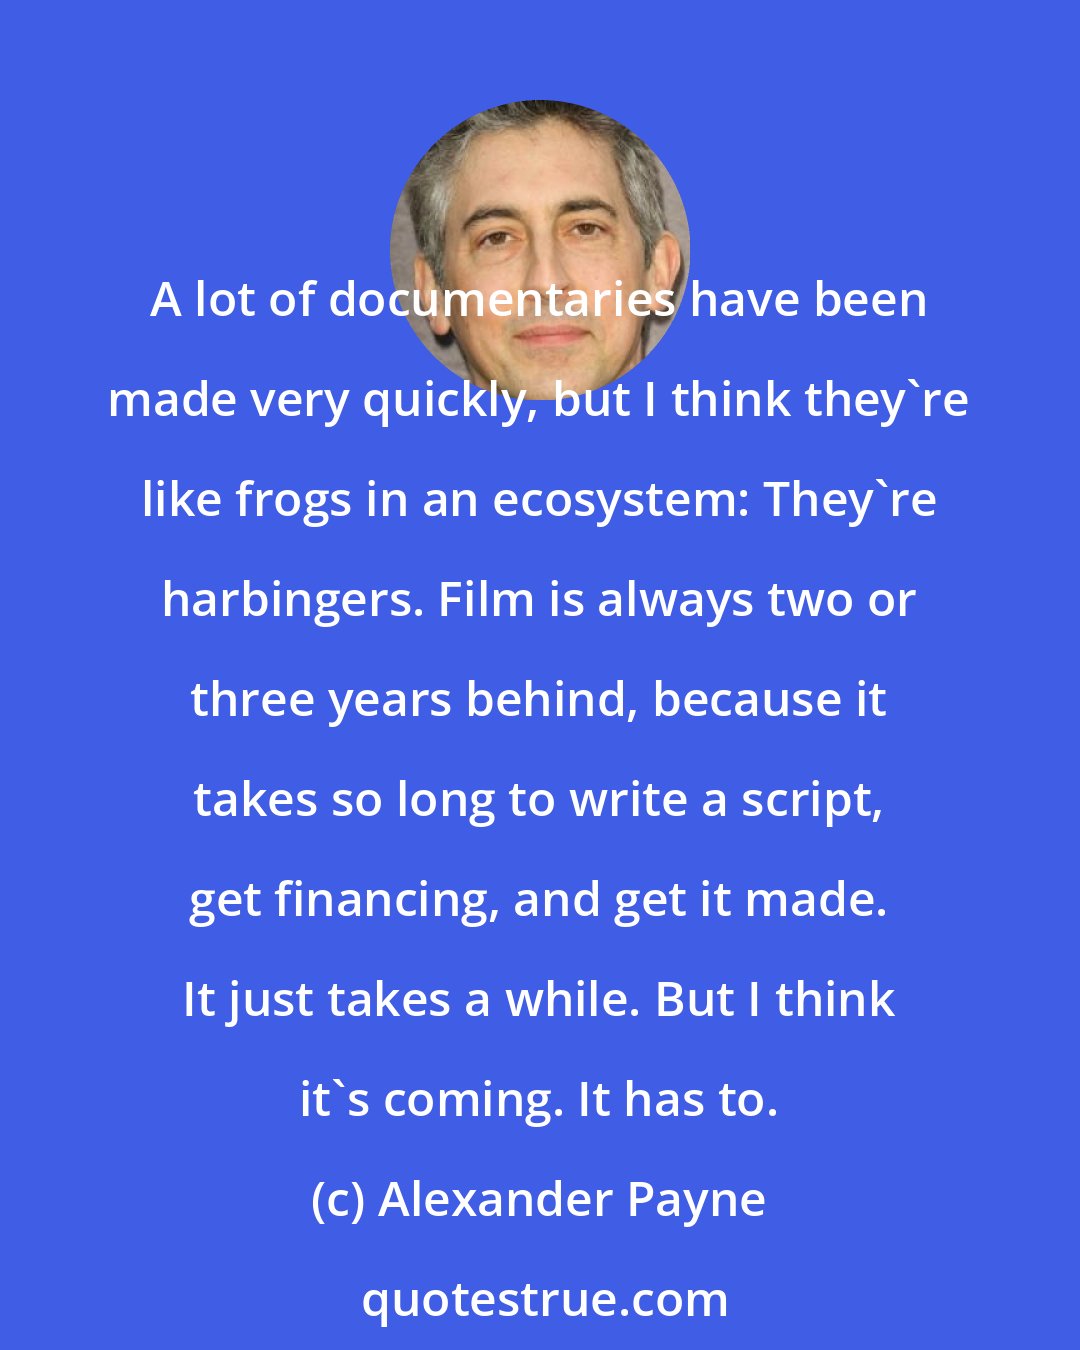 Alexander Payne: A lot of documentaries have been made very quickly, but I think they're like frogs in an ecosystem: They're harbingers. Film is always two or three years behind, because it takes so long to write a script, get financing, and get it made. It just takes a while. But I think it's coming. It has to.